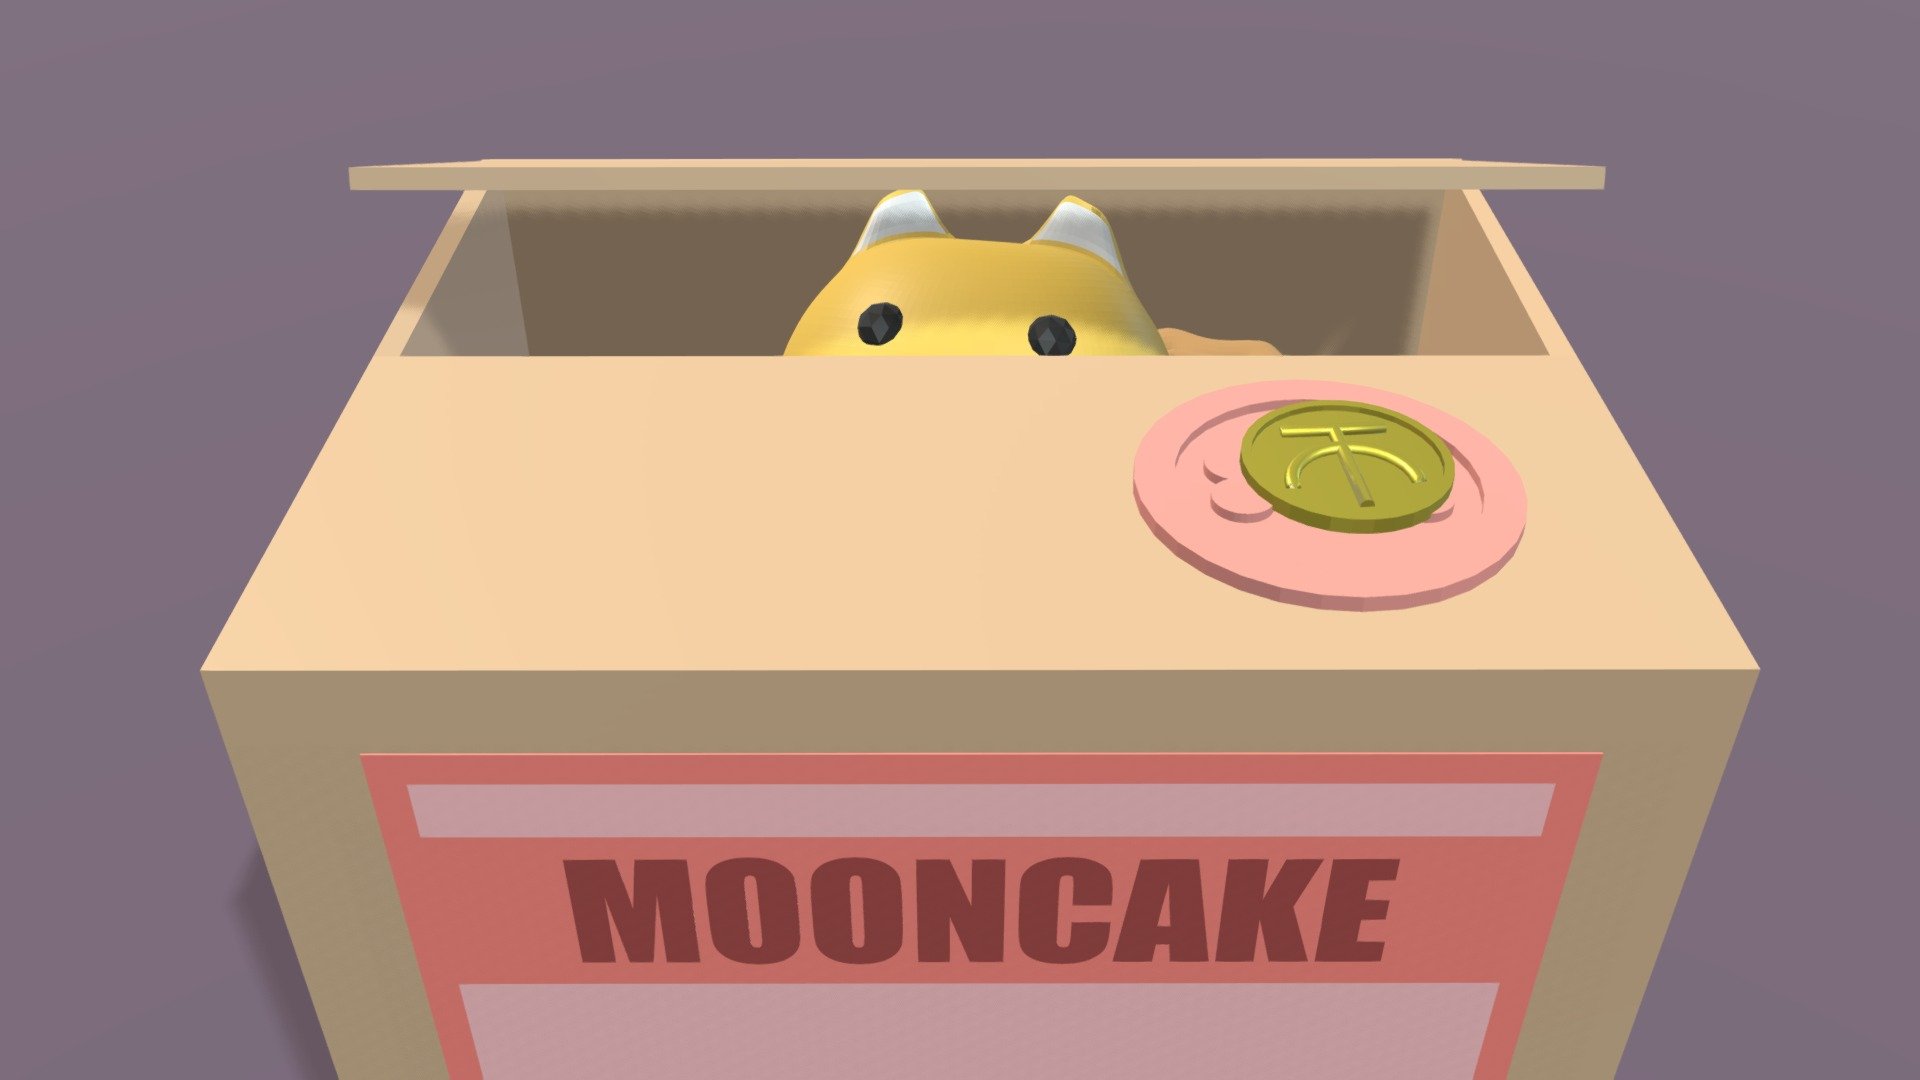 Fan art made for Project C (JYP).

Date: 19 Sep 2021 - Catbox with a mooncake (Mid-Autumn Festival) - 3D model by Tin Pui-yiu (@TinPuiYiu) 3d model